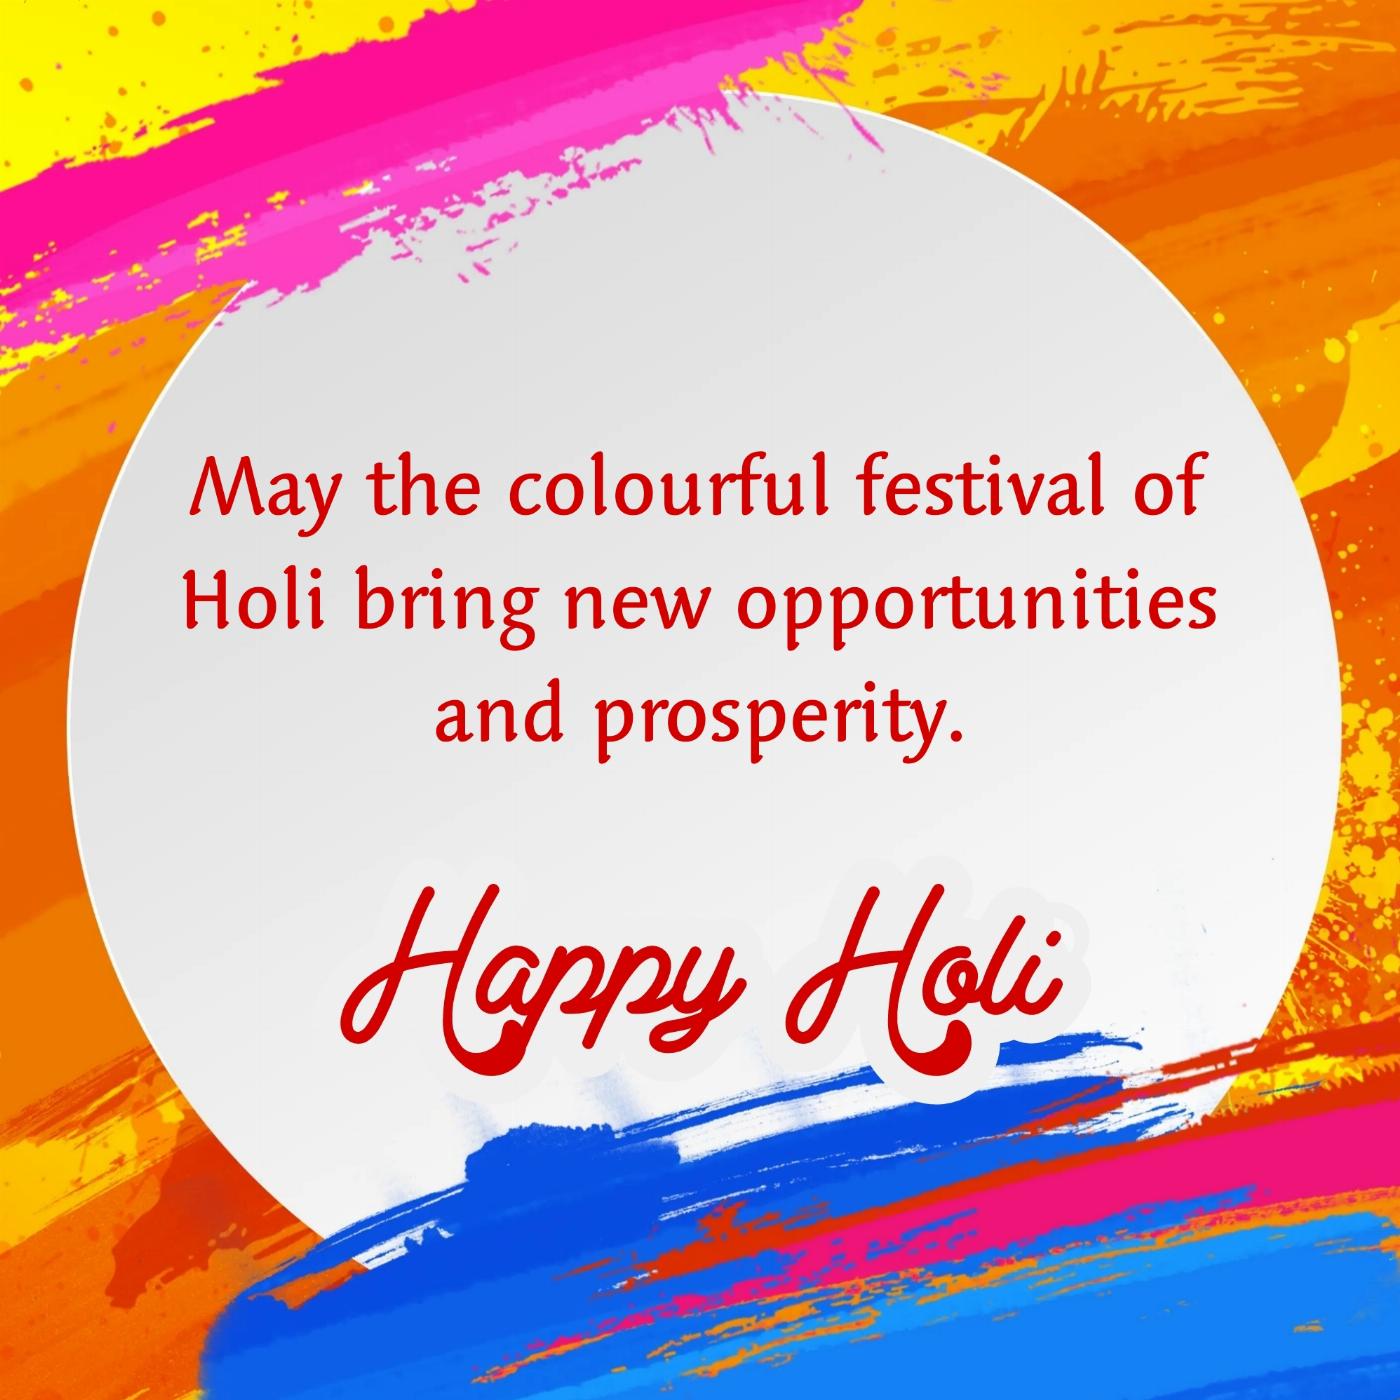 May the colourful festival of Holi bring new opportunities and prosperity